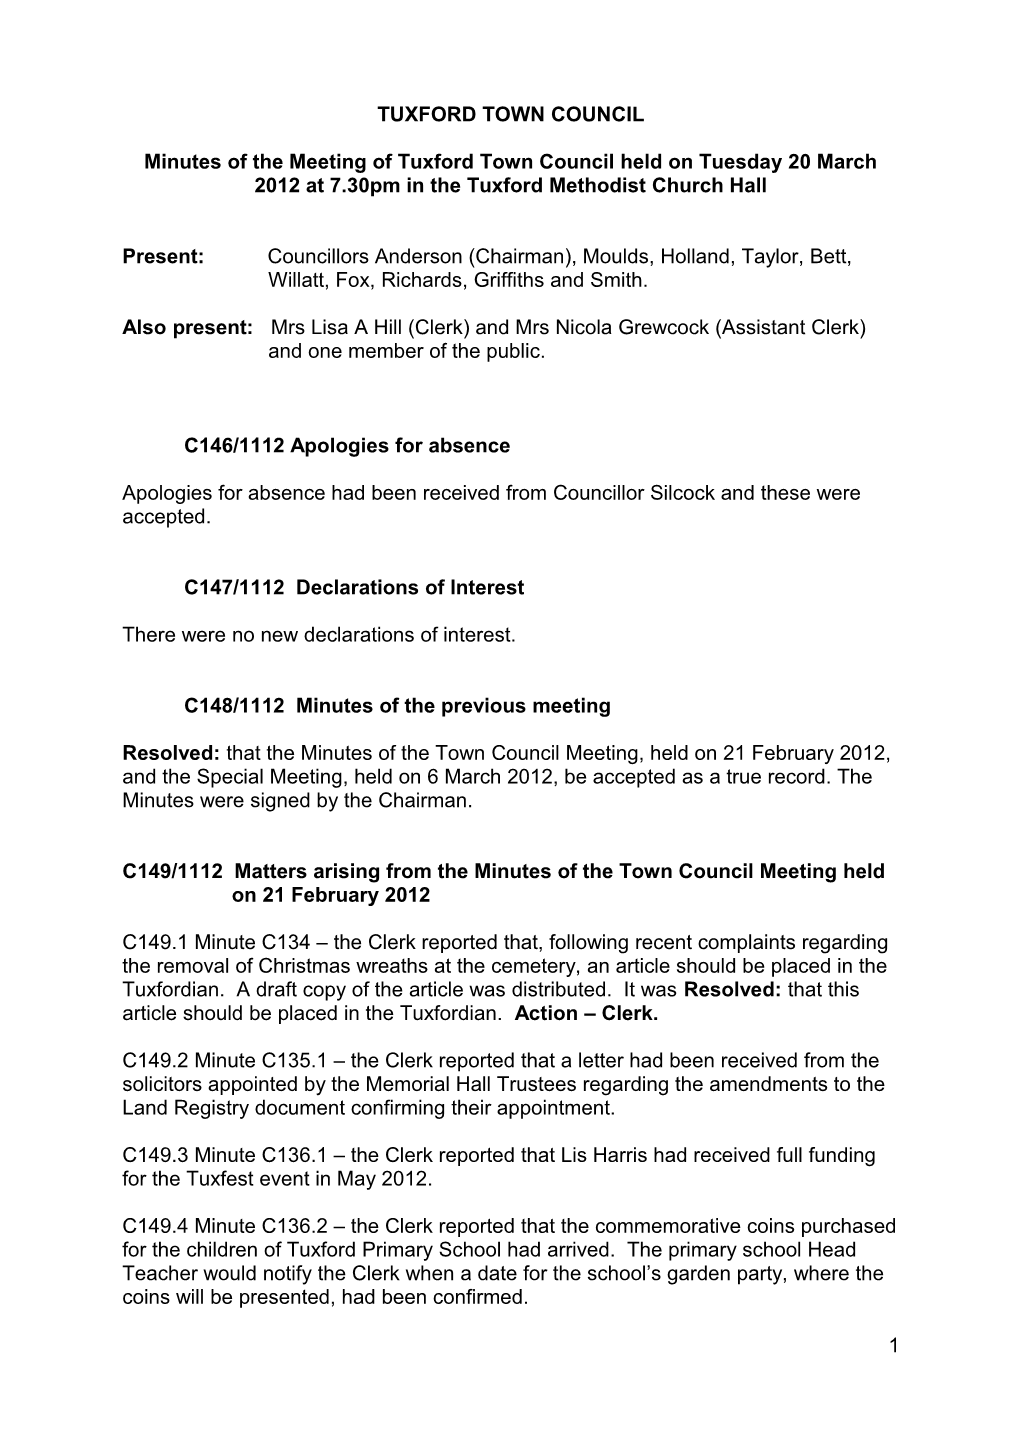 Minutes of the Meeting of Tuxford Parish Council Held on Tuesday 18 July 2006 at 7 s3